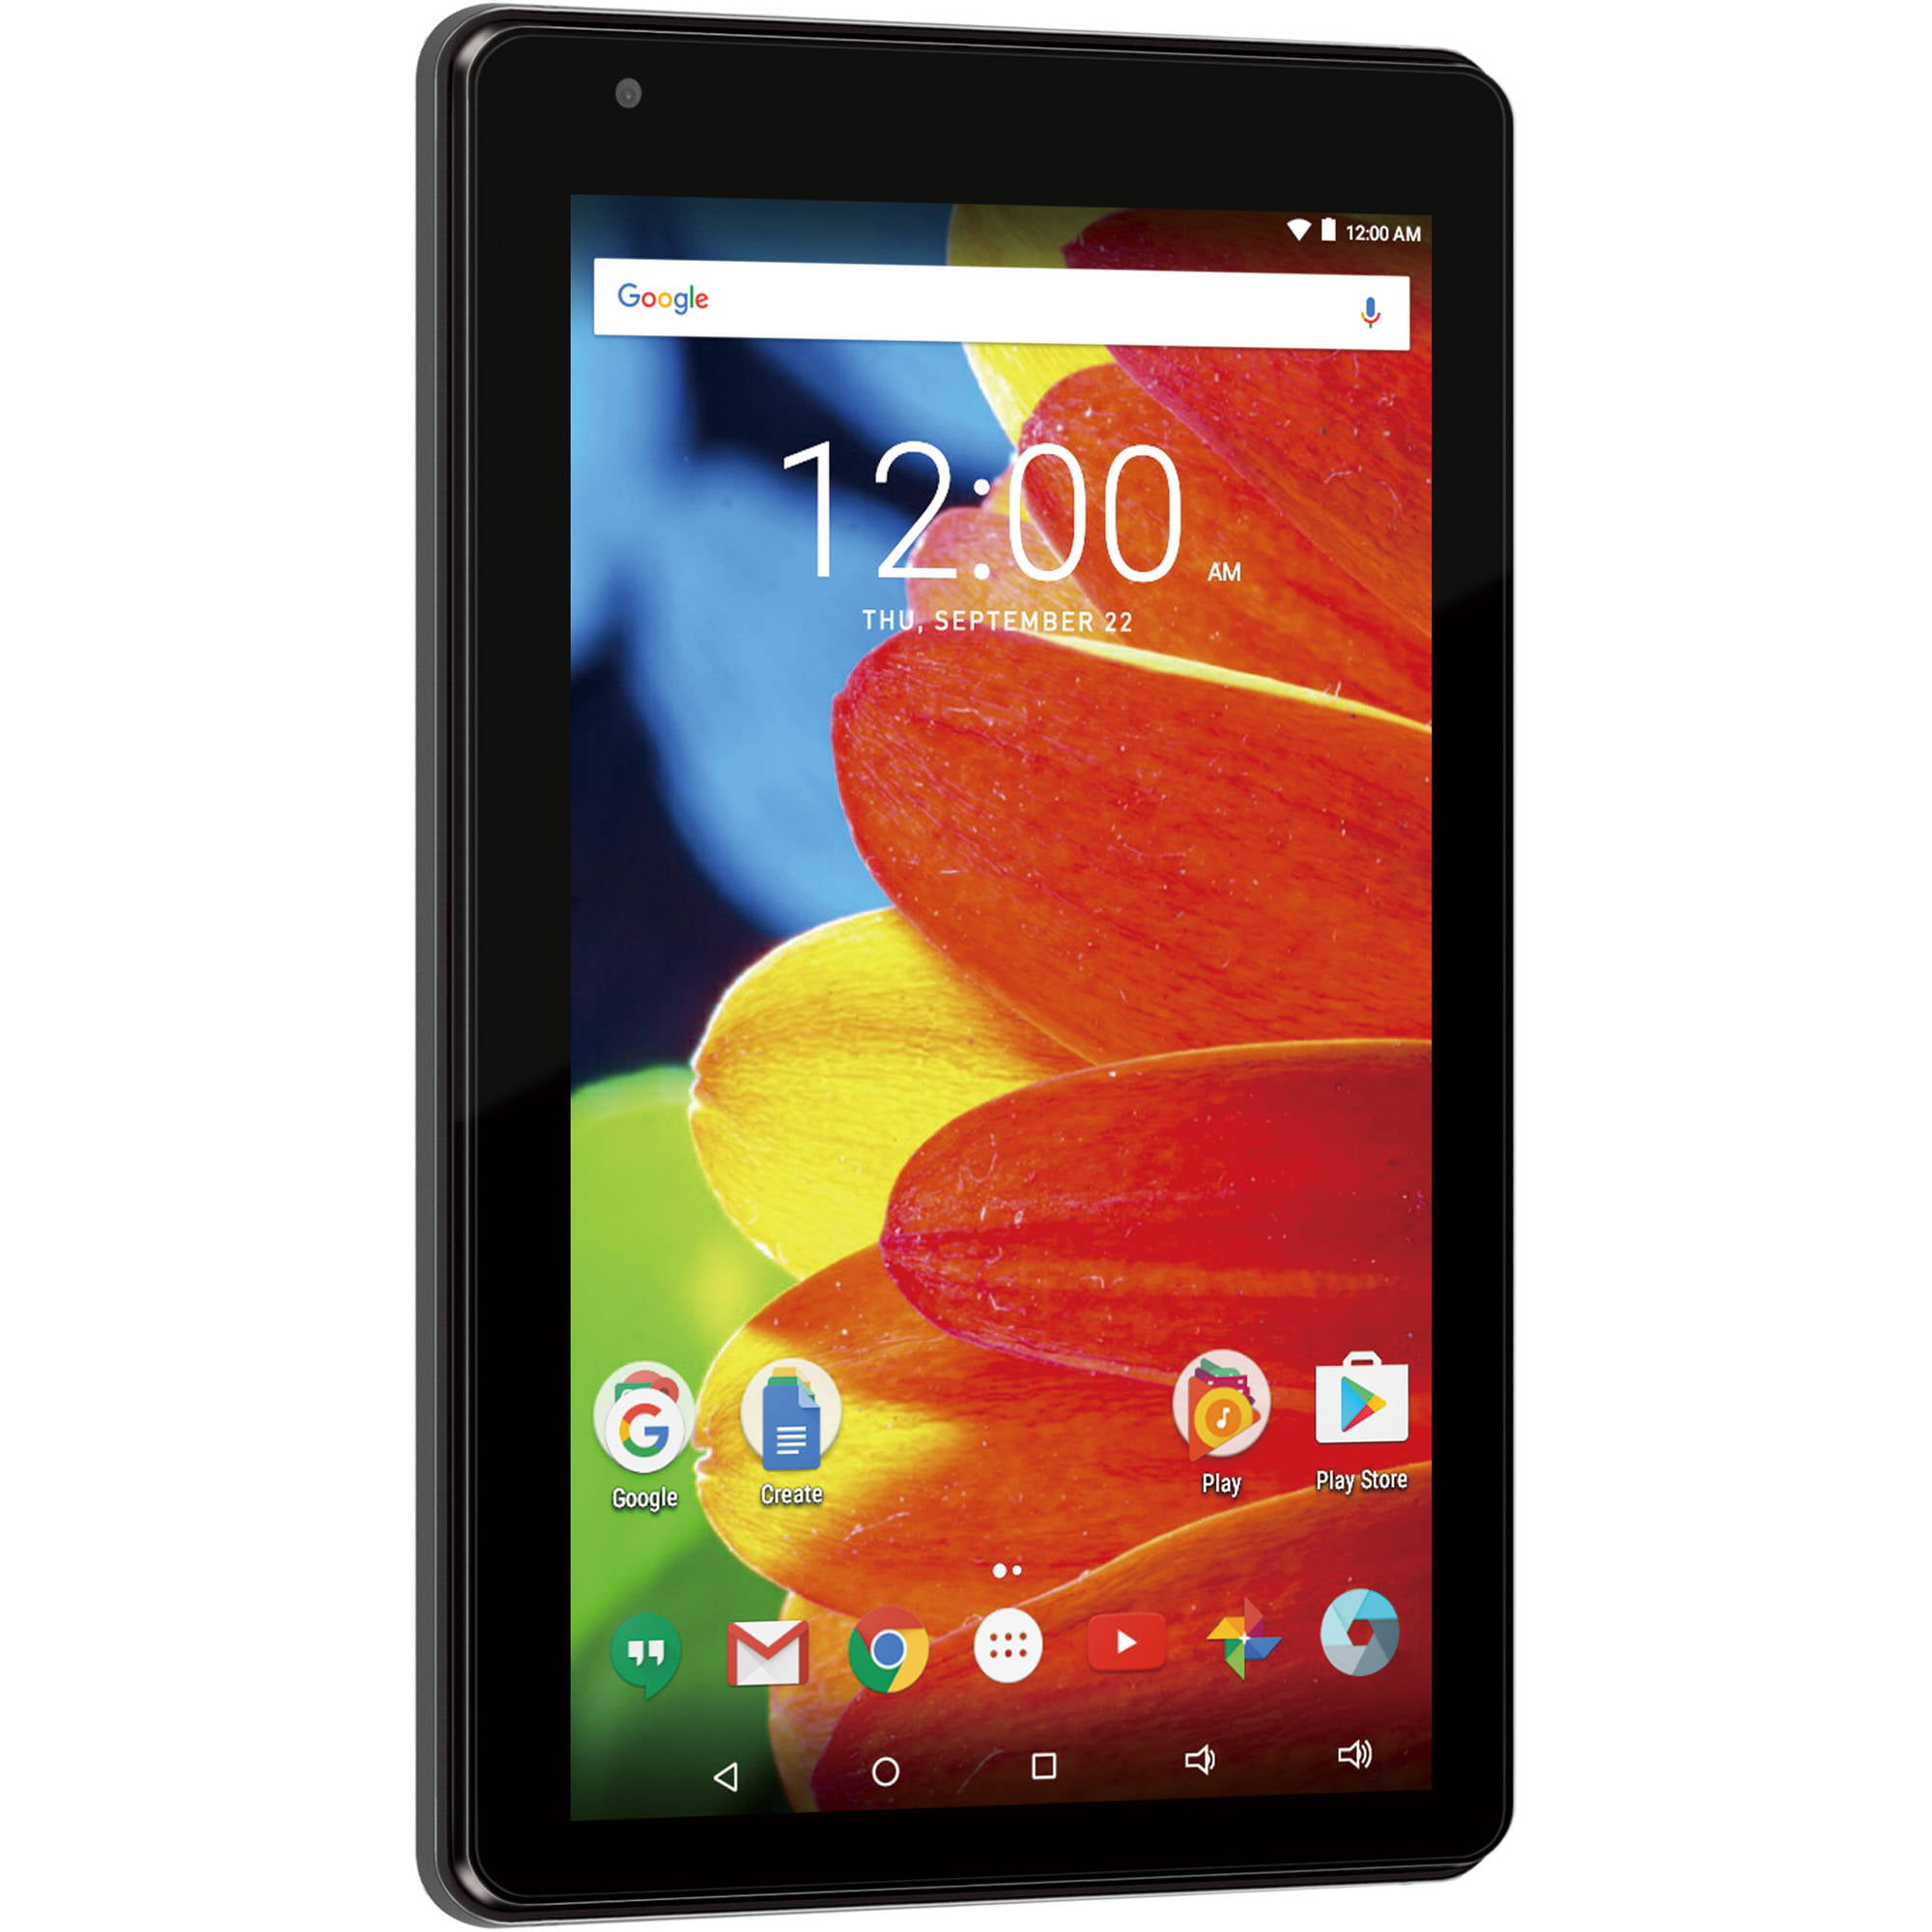 RCA Voyager 7" 16GB Tablet Android 6.0 (Marshmallow) CHARCOAL | eBay